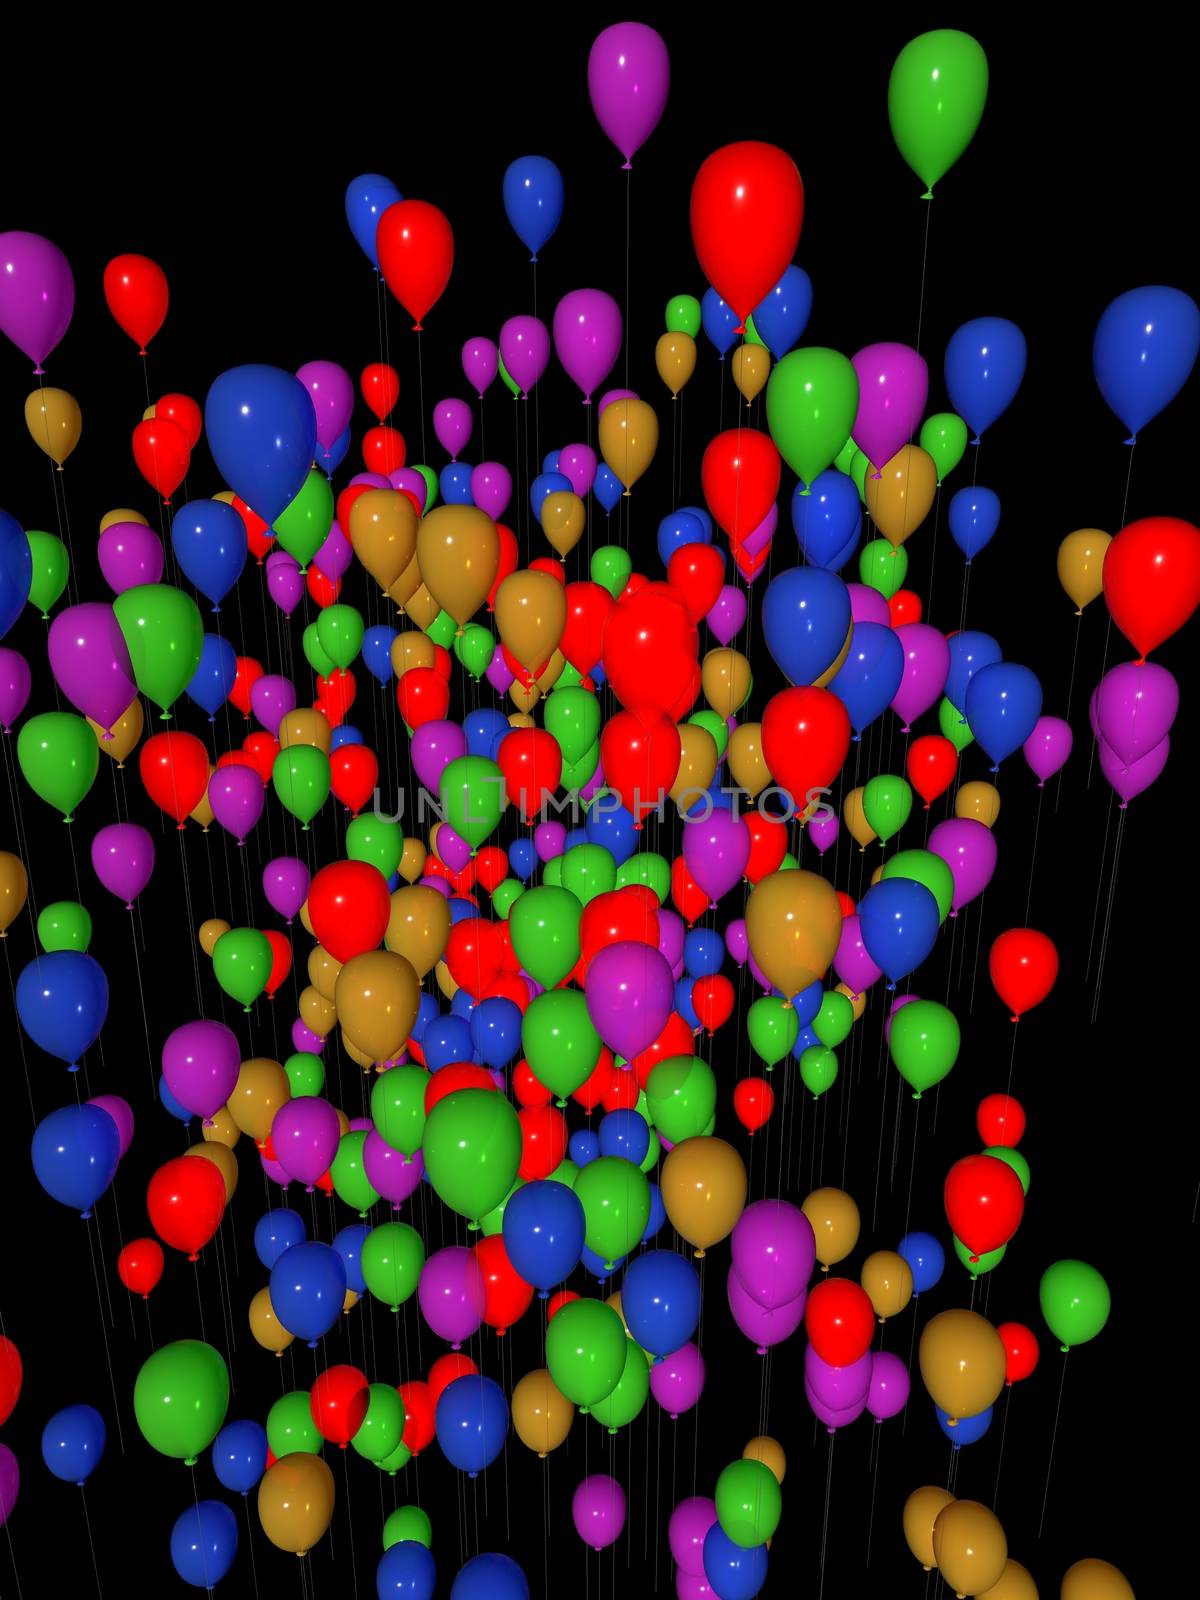 Several flying colored balloons  by fares139